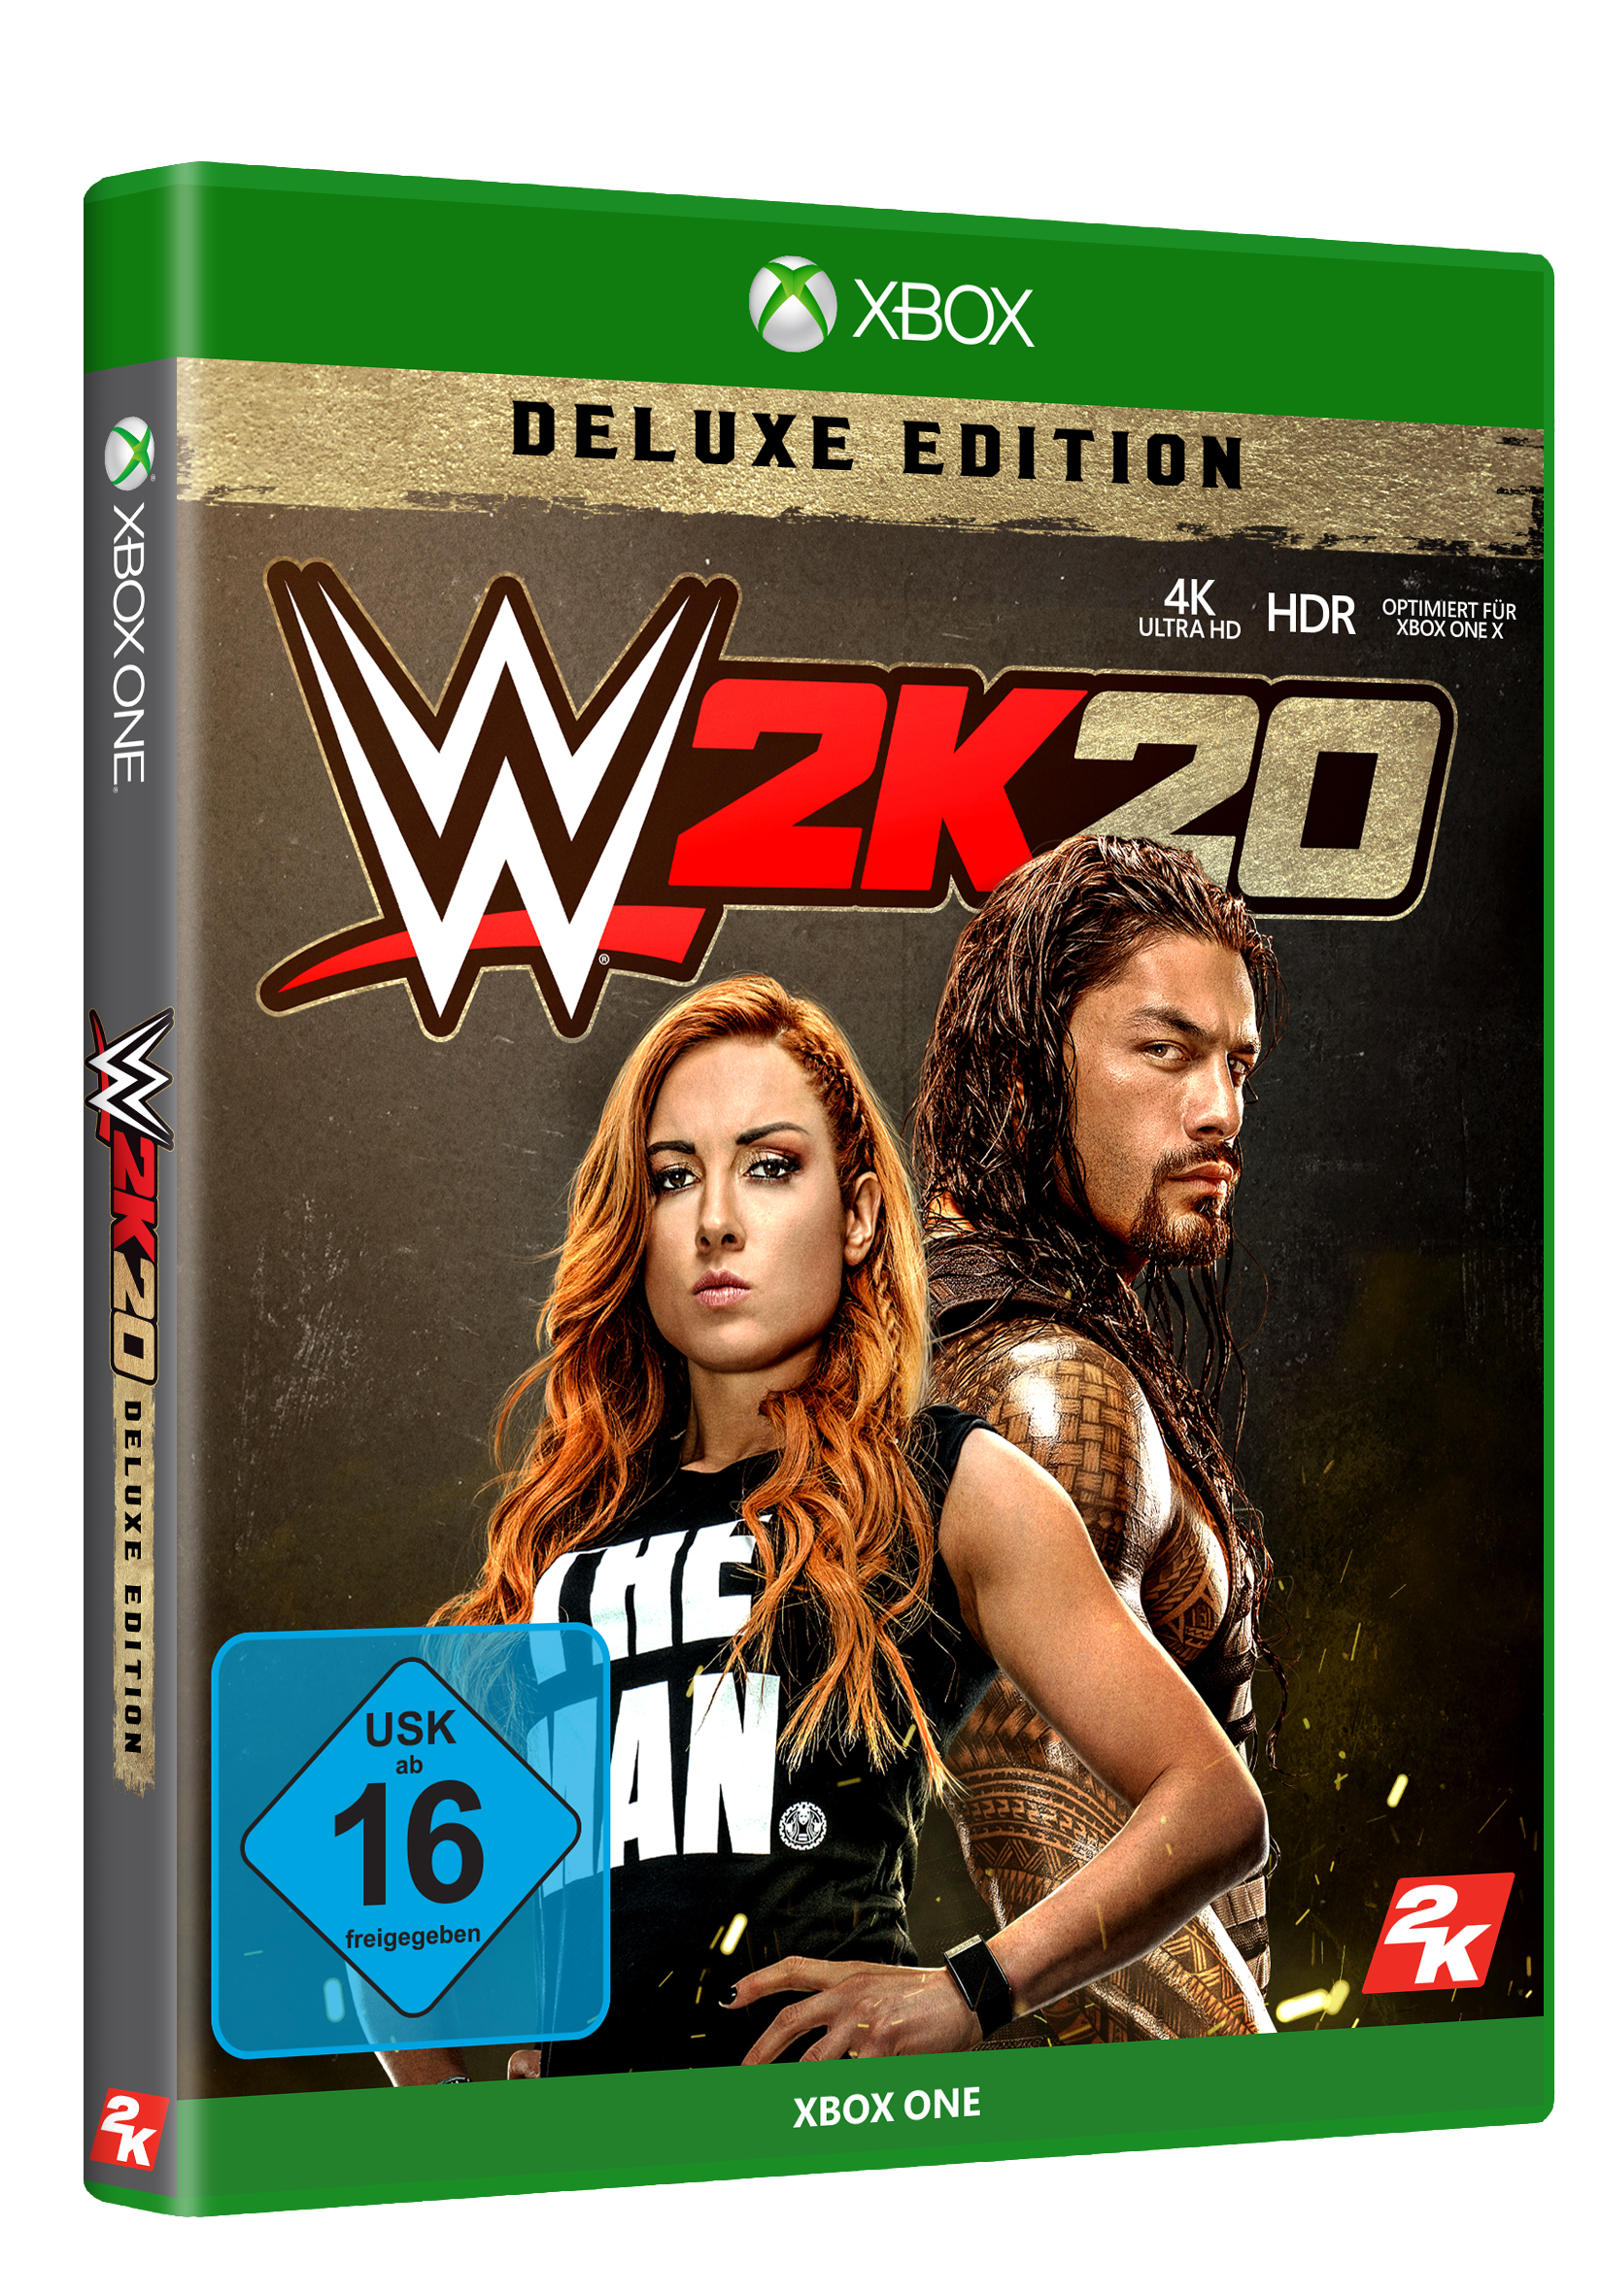 [Xbox Edition WWE - 2K20 - One] Deluxe